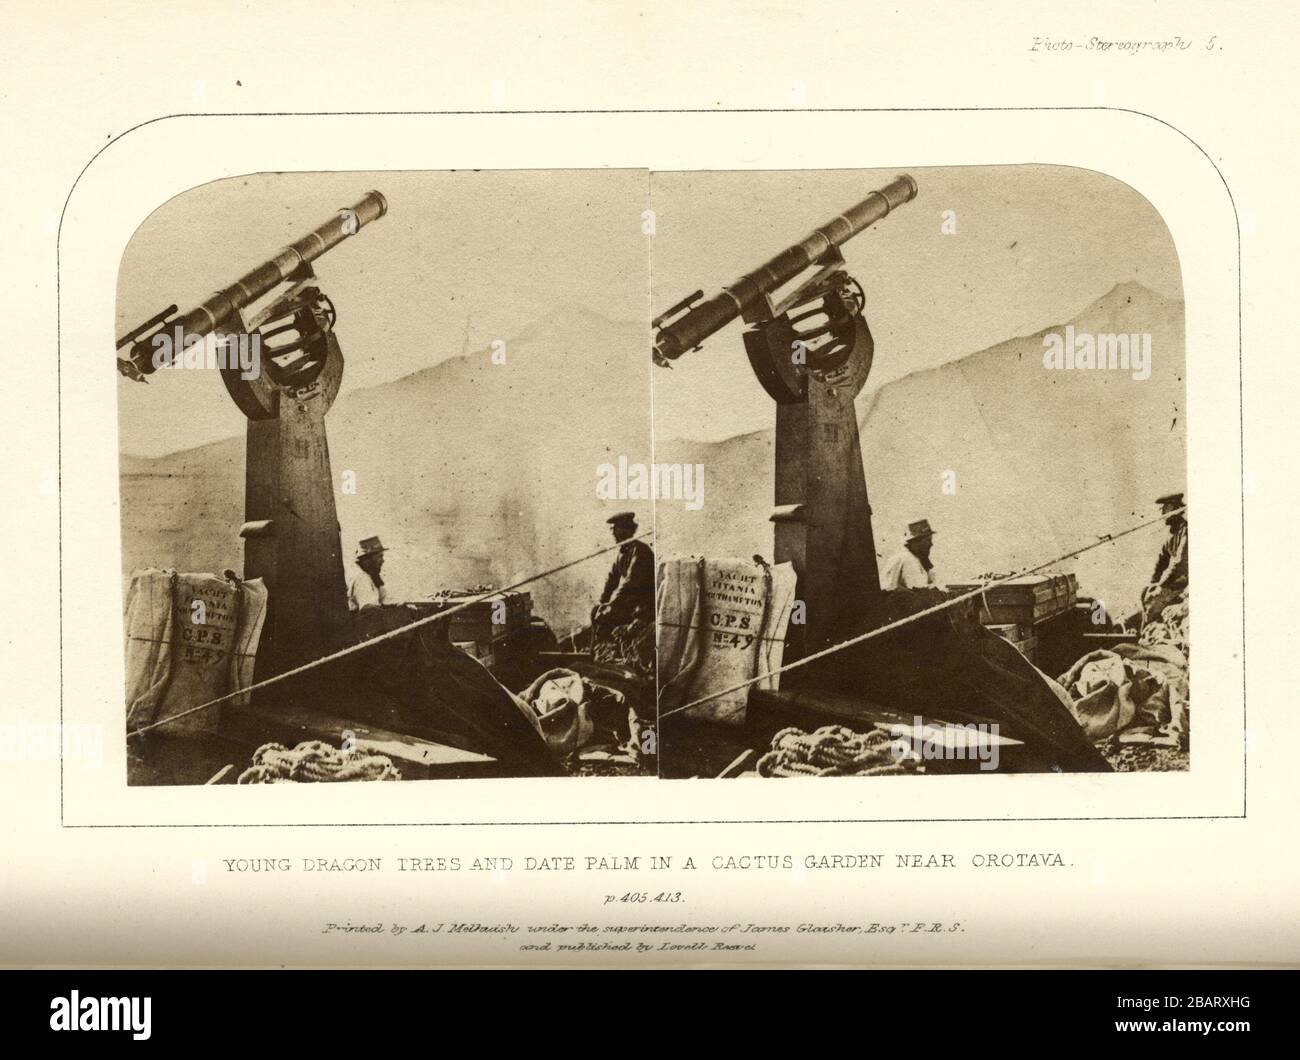 Sheepshanks Telescope First Erected on Mount Guajara..., by Charles Piazzi Smyth, 1856 Stock Photo